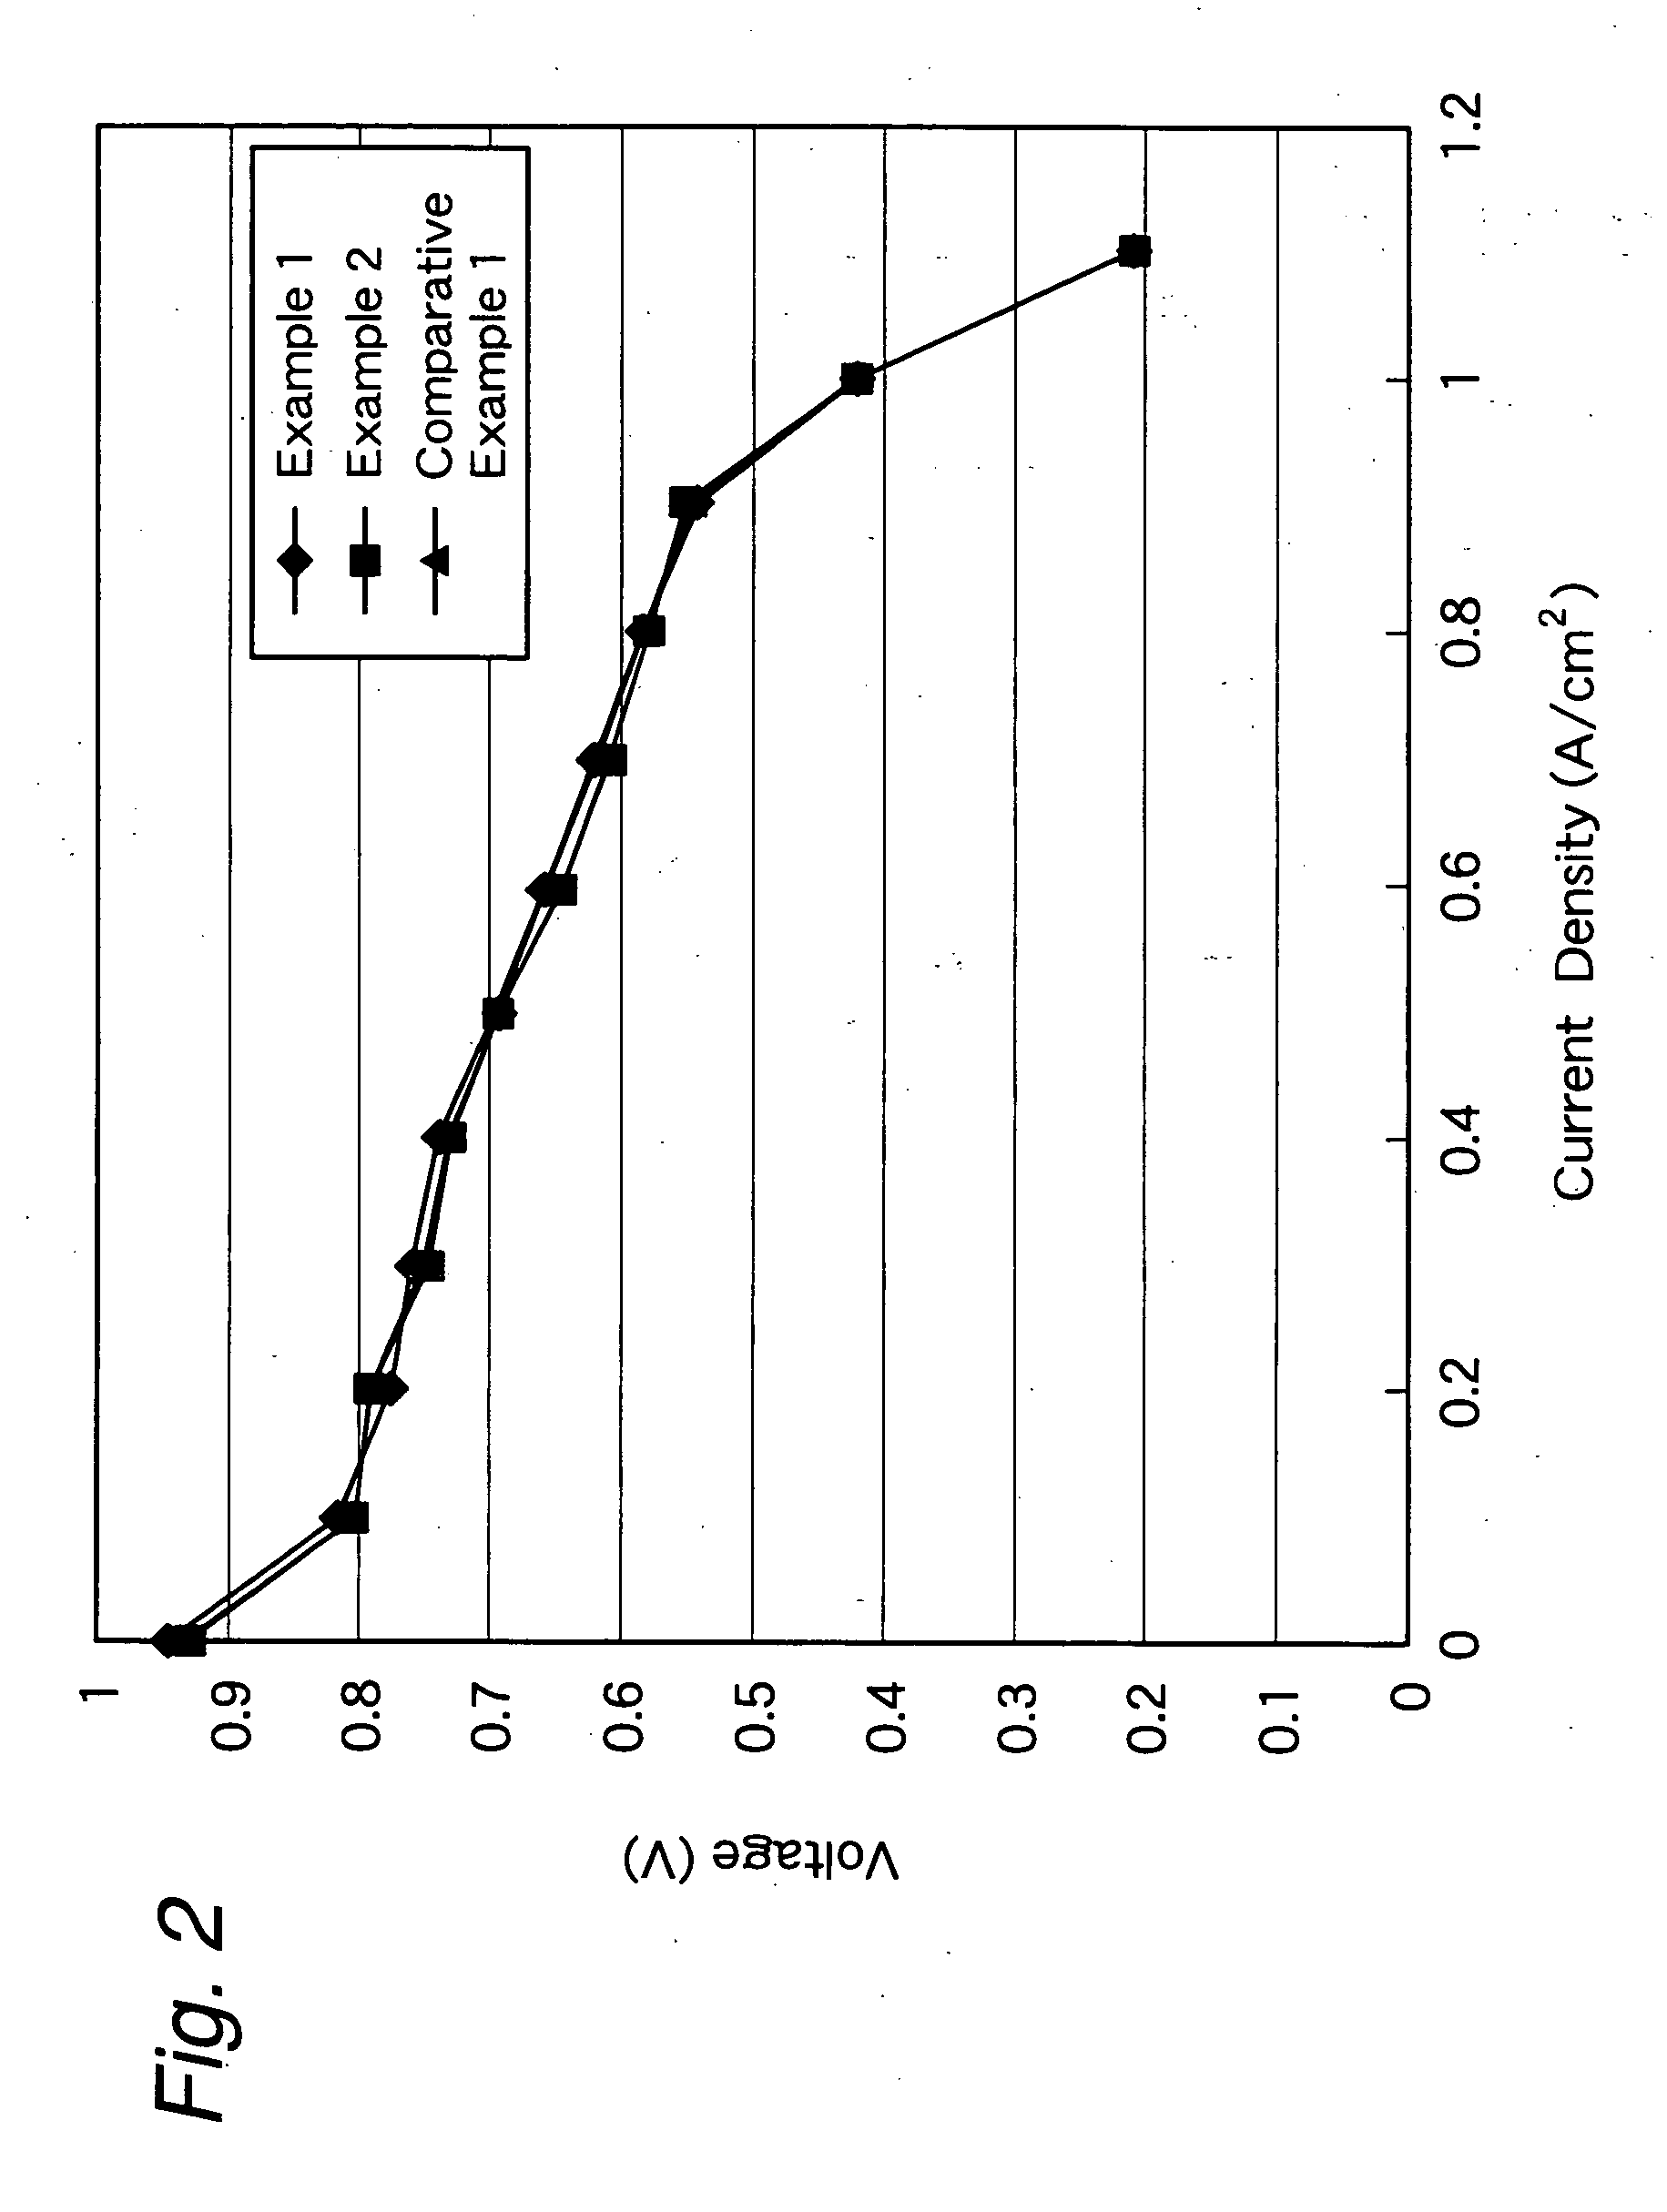 Membrane-electrode structure for solid polymer fuel cell